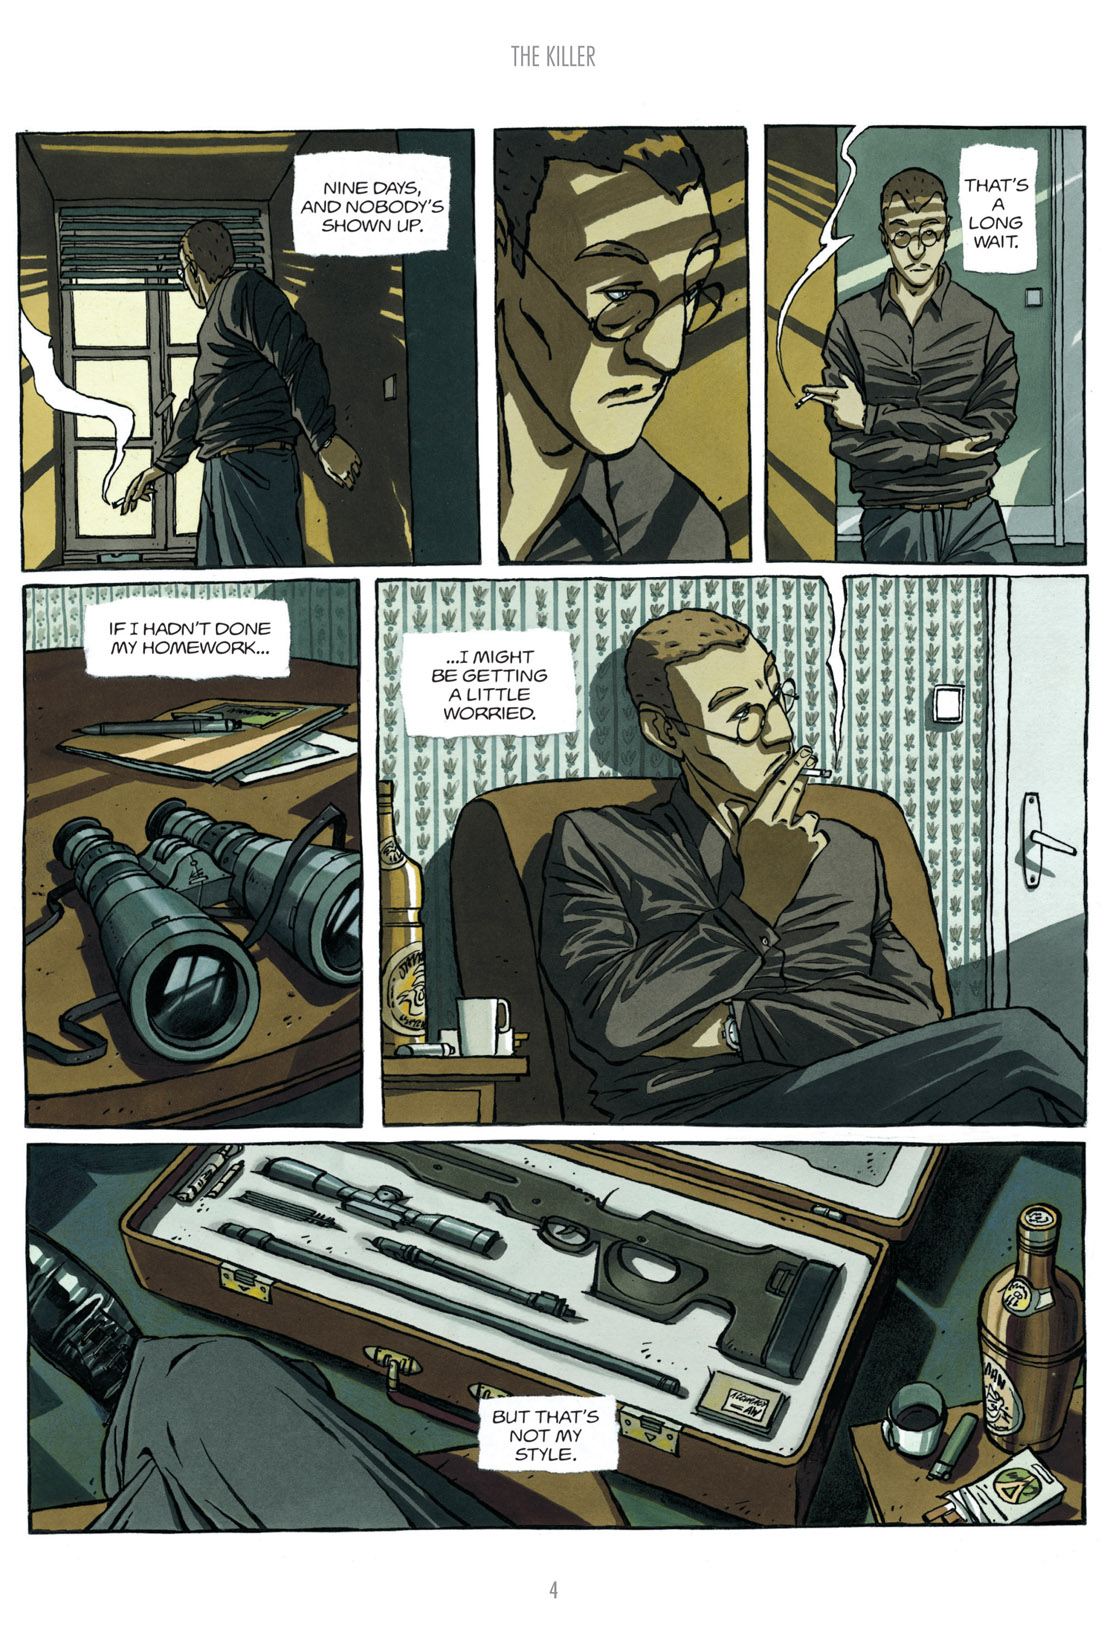 Read online The Killer comic -  Issue # TPB 1 - 7